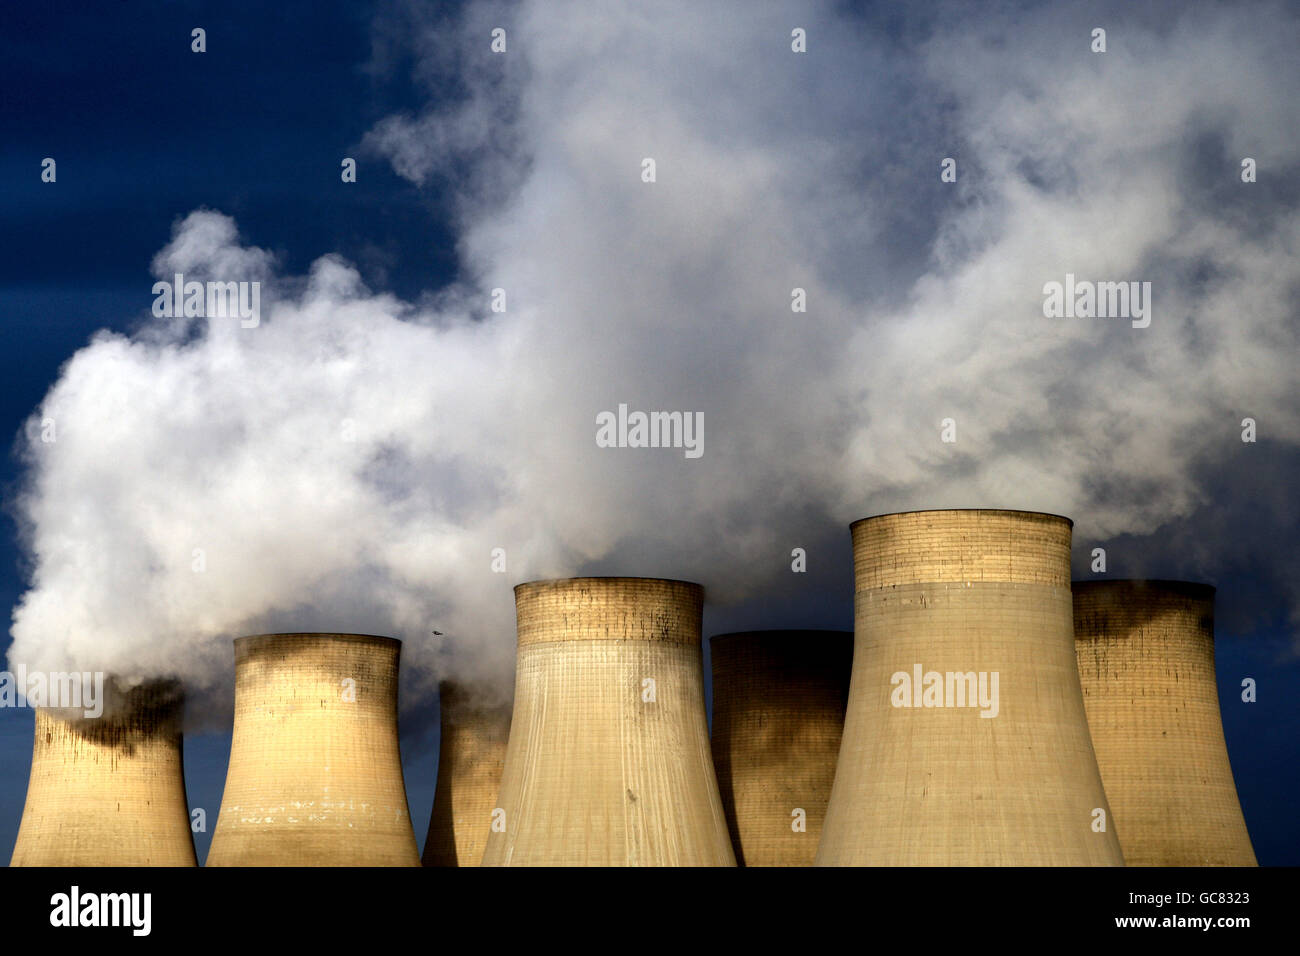 Ratcliffe On Soar Power Station. A general view of Ratcliffe On Soar power station Stock Photo